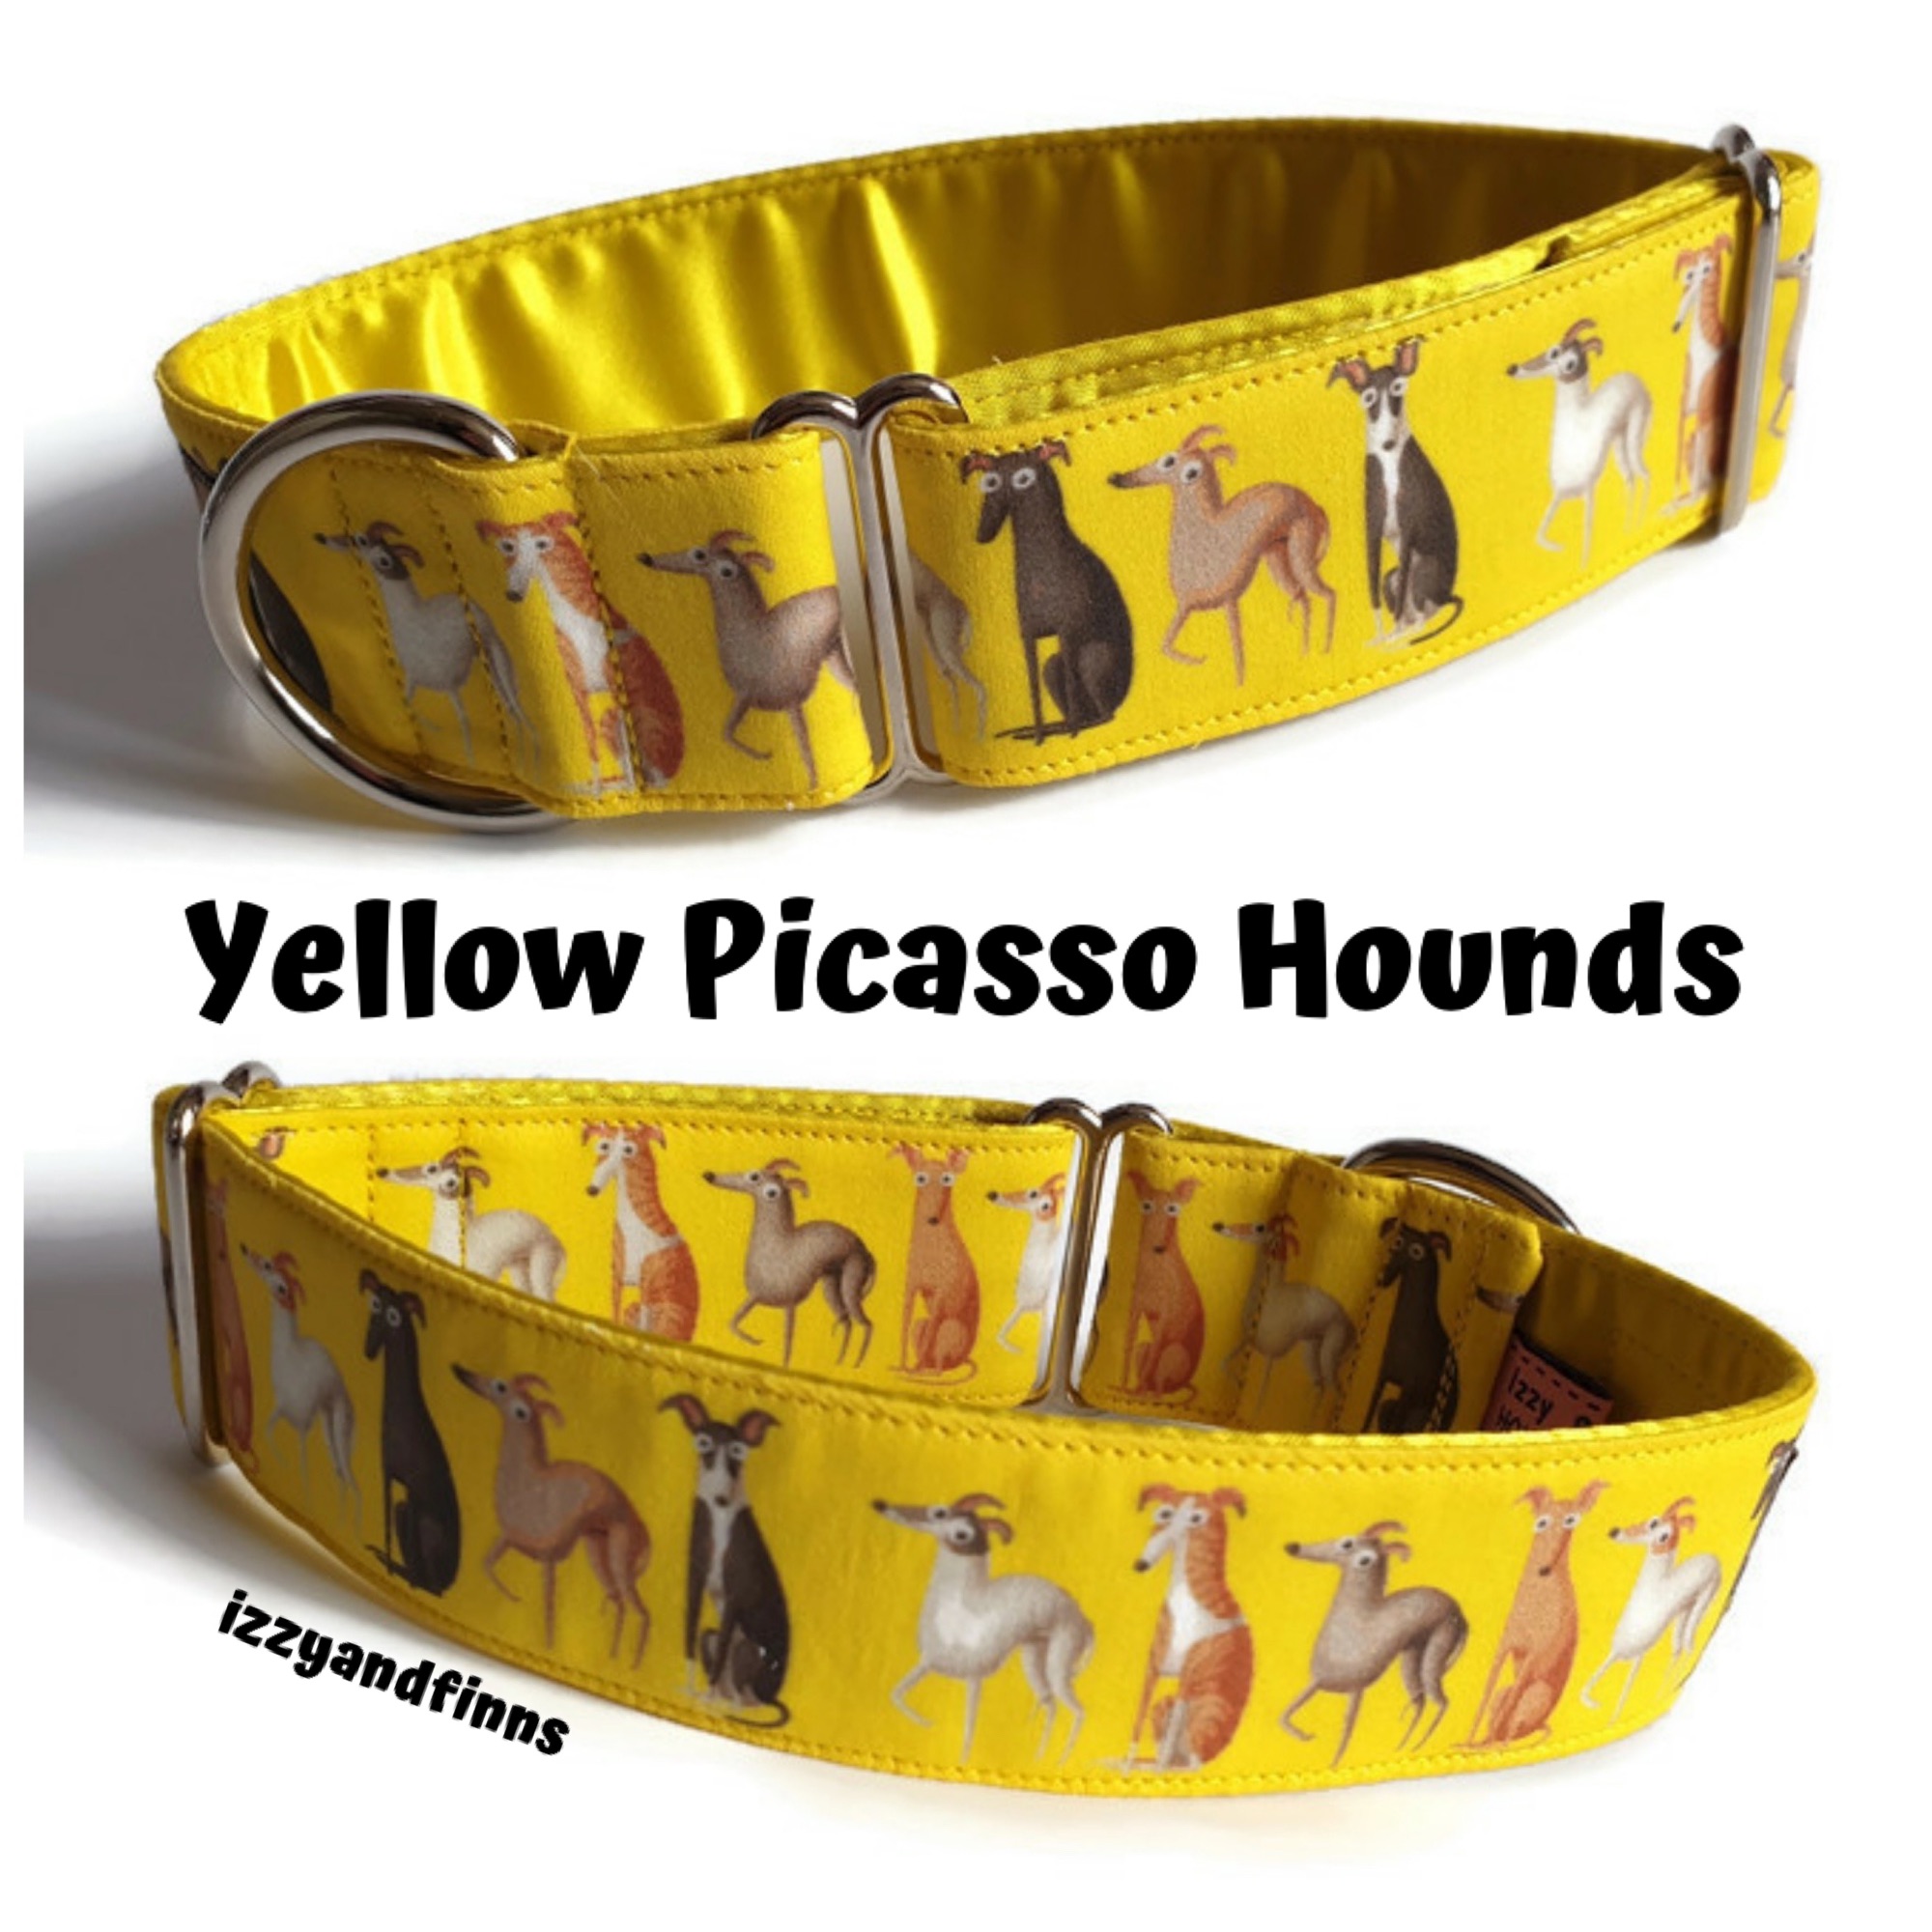 Yellow Picasso Hounds